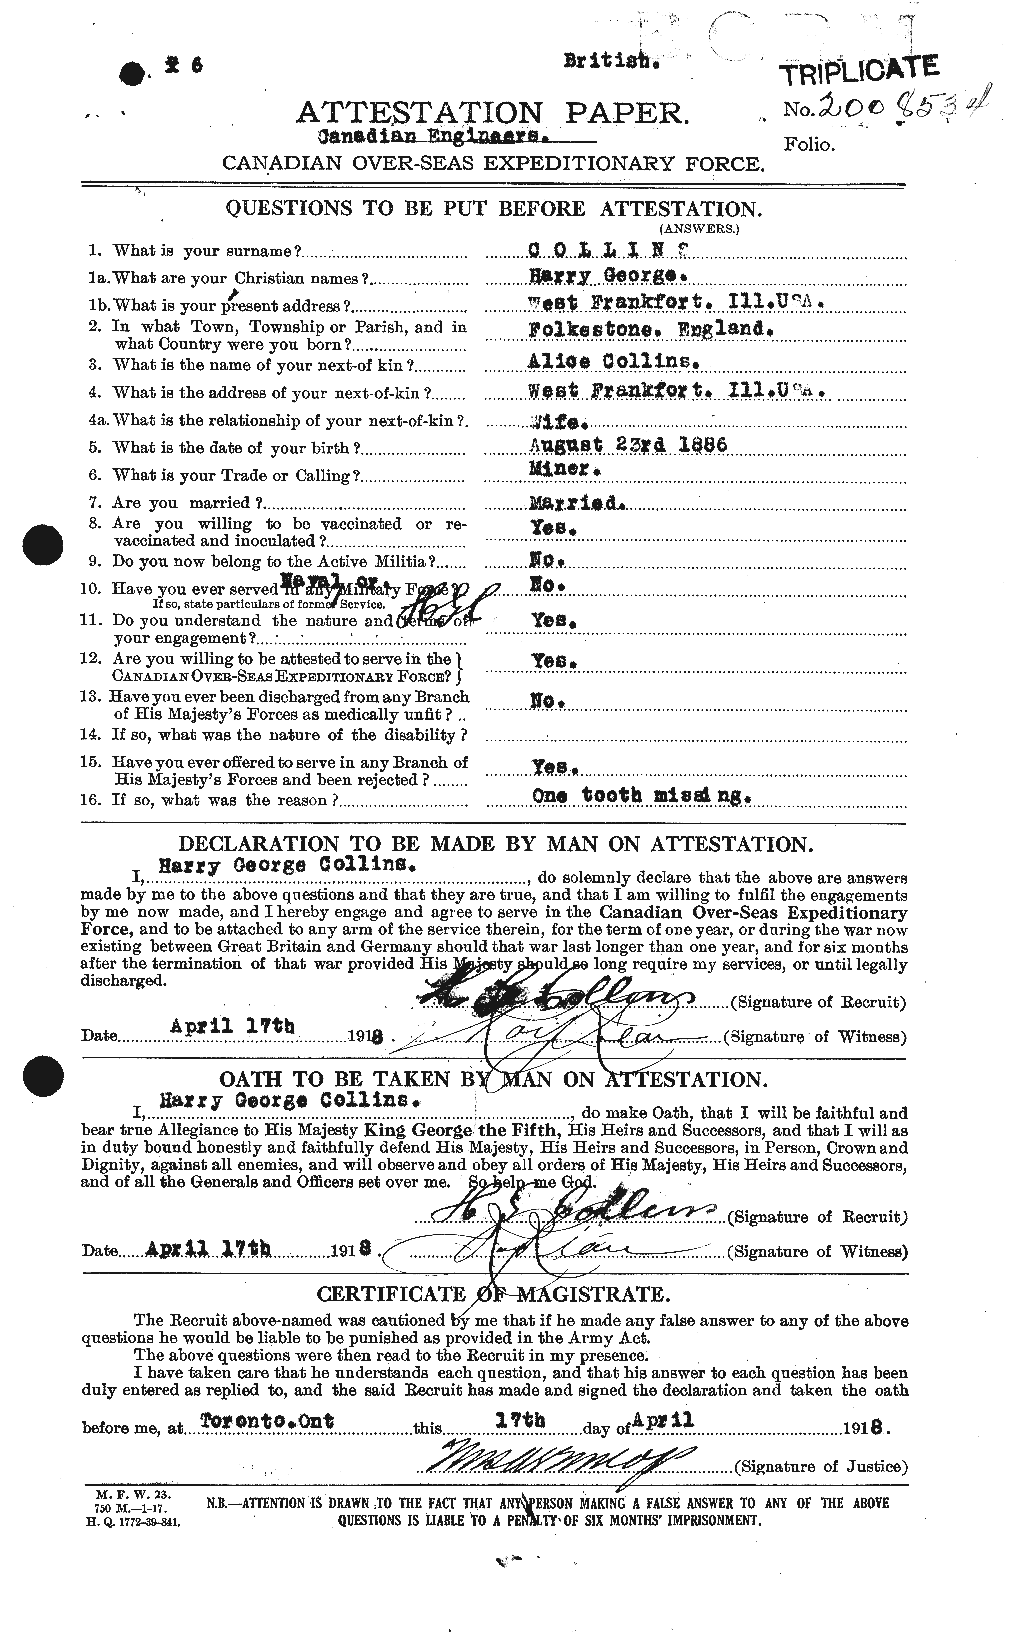 Personnel Records of the First World War - CEF 070019a